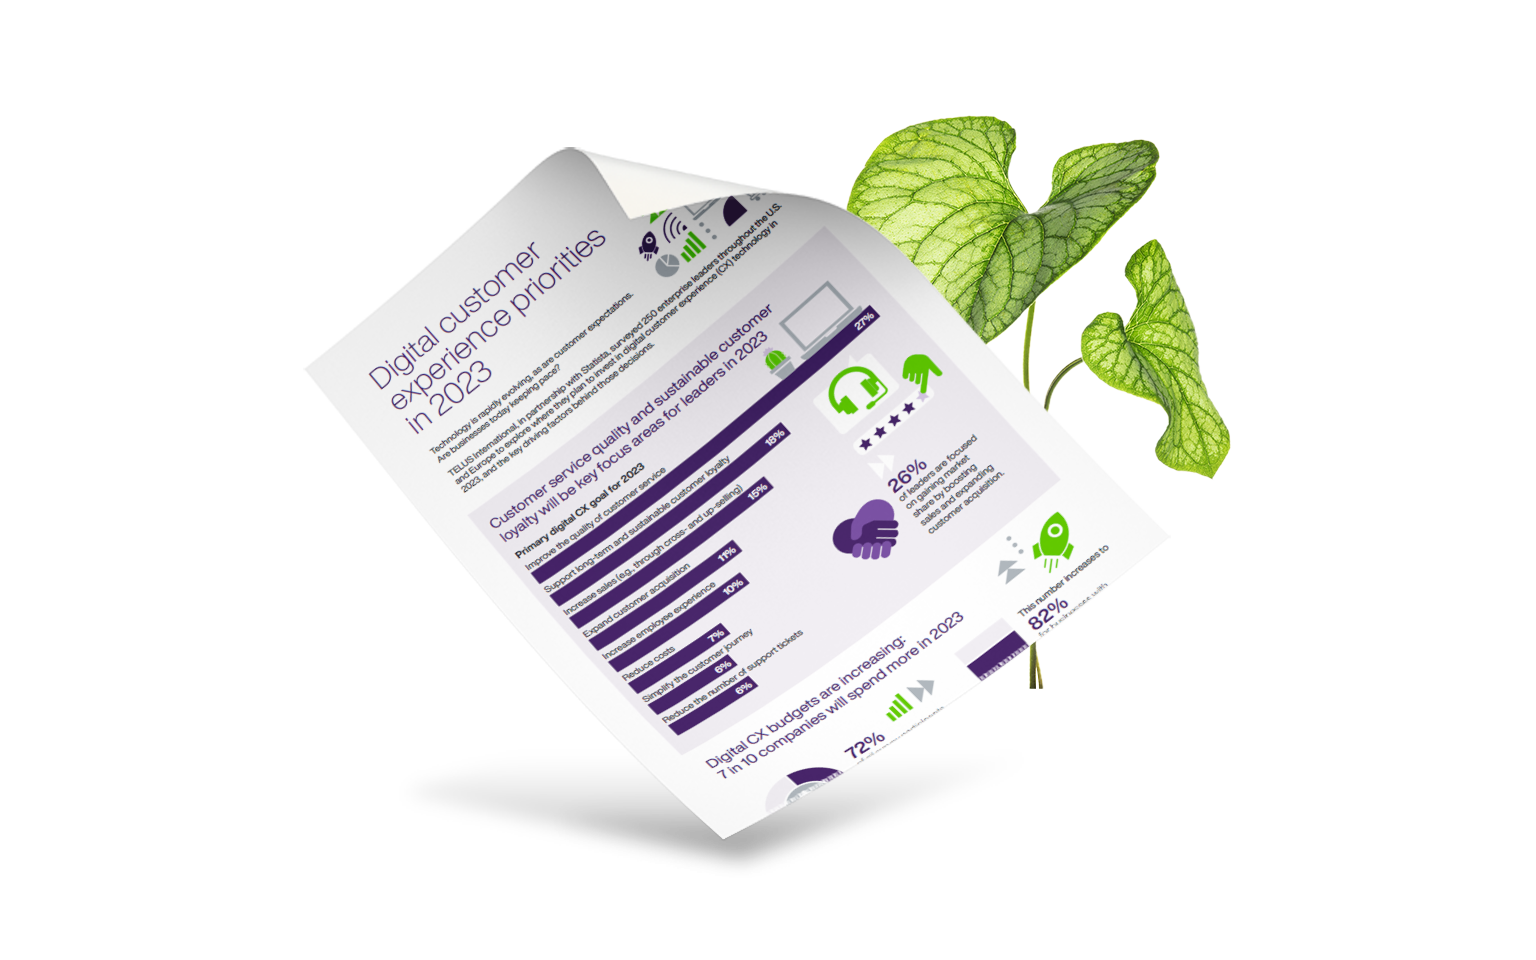 A copy of the Digital customer experience priorities in 2023 report on top of a green leafy plant.